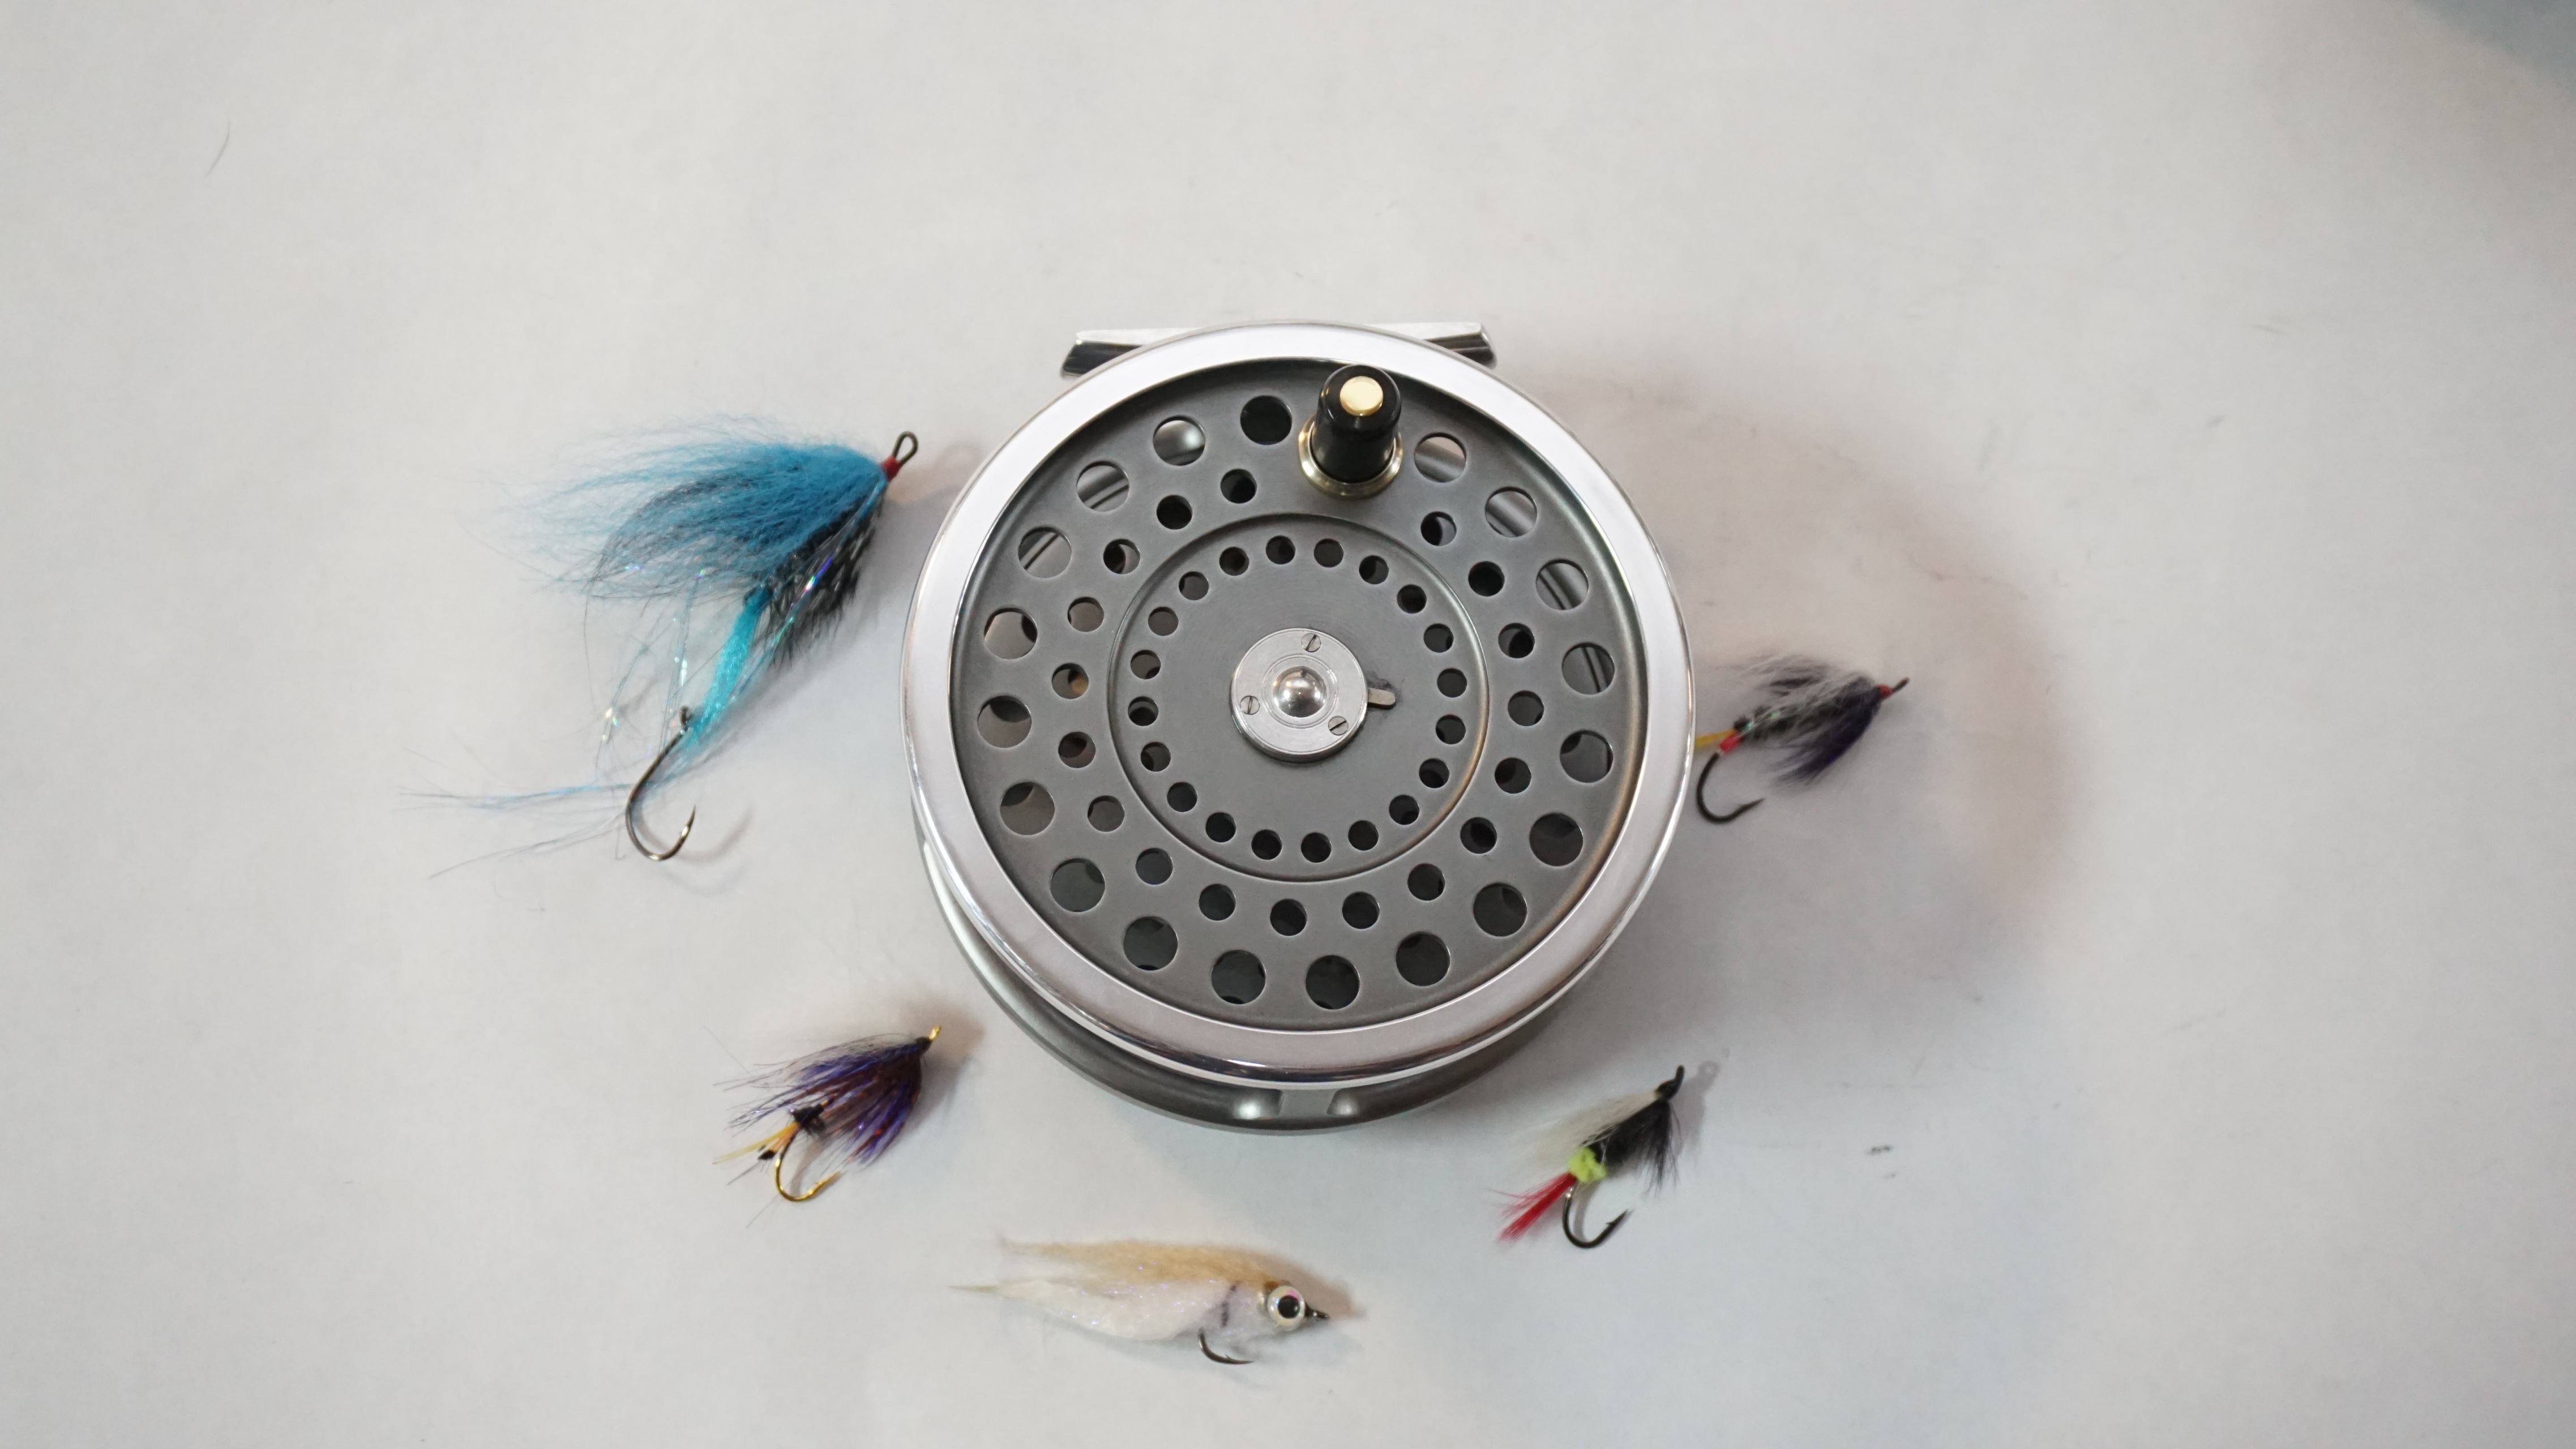 Hardy Marquis LWT Fly Fishing Reel Product Details